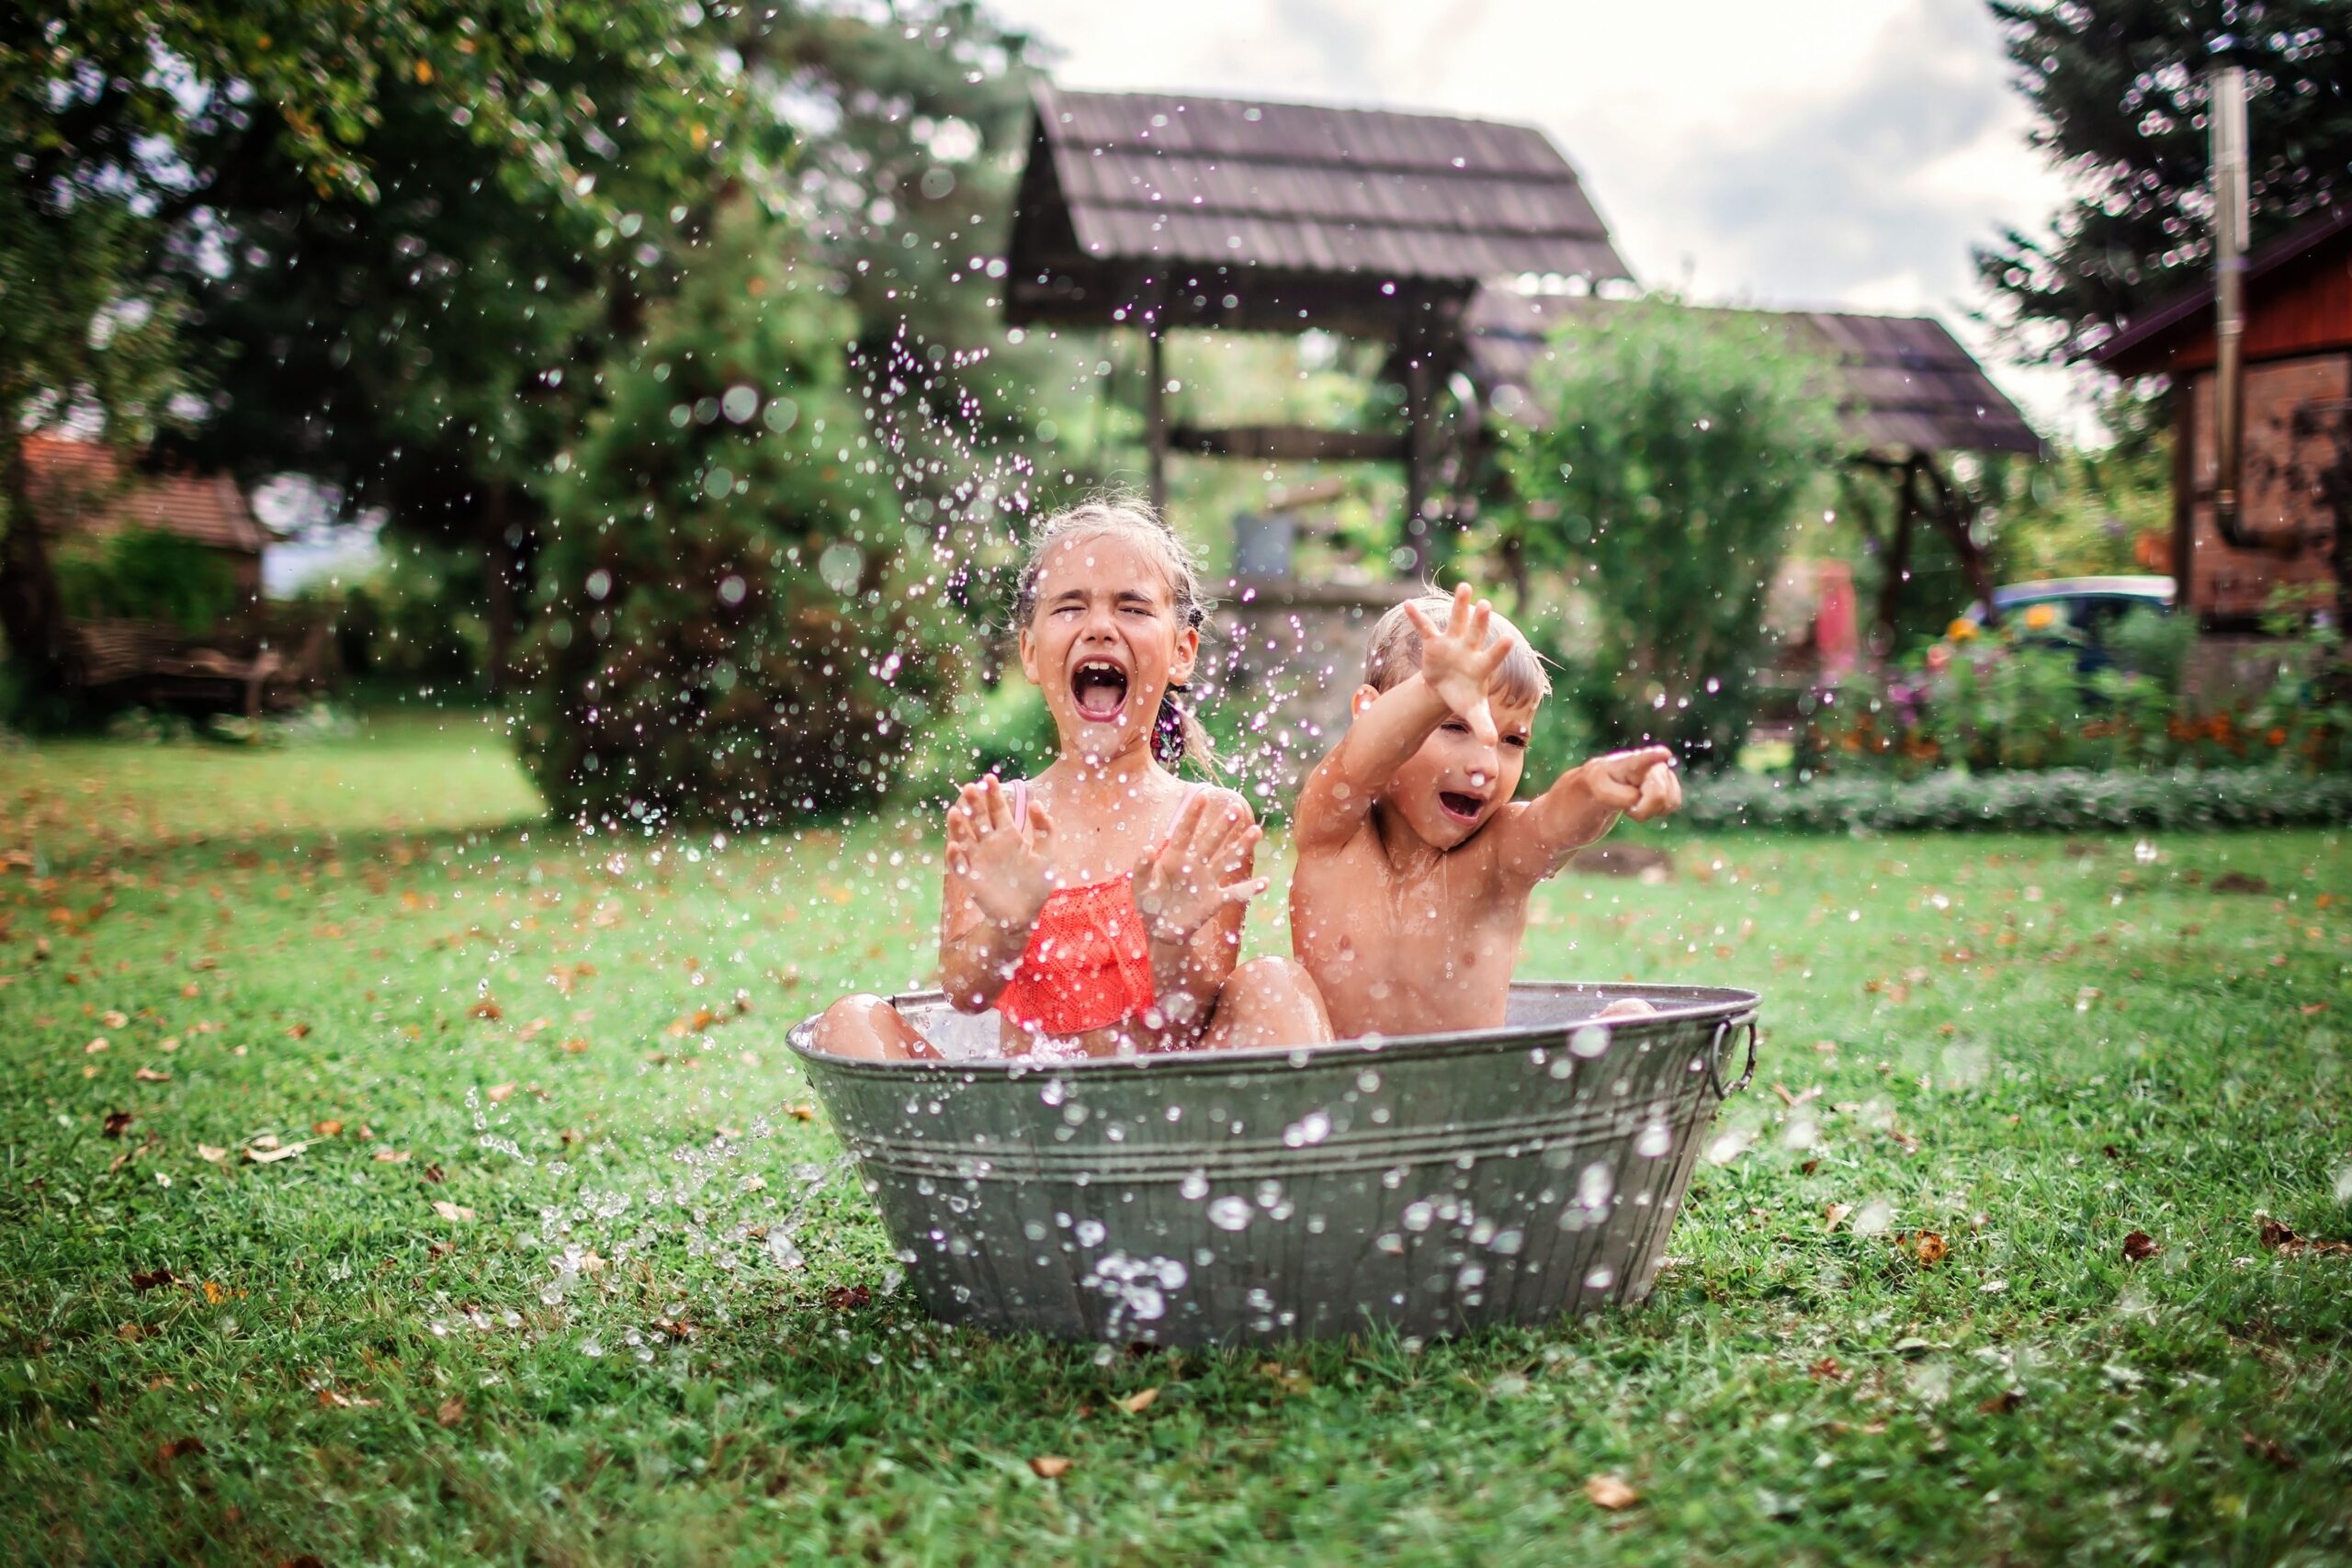 Cute kids having fun, bathing and splashing in old iron bowl on the backyard of wooden house, happy summertime, outdoor lifestyle, 